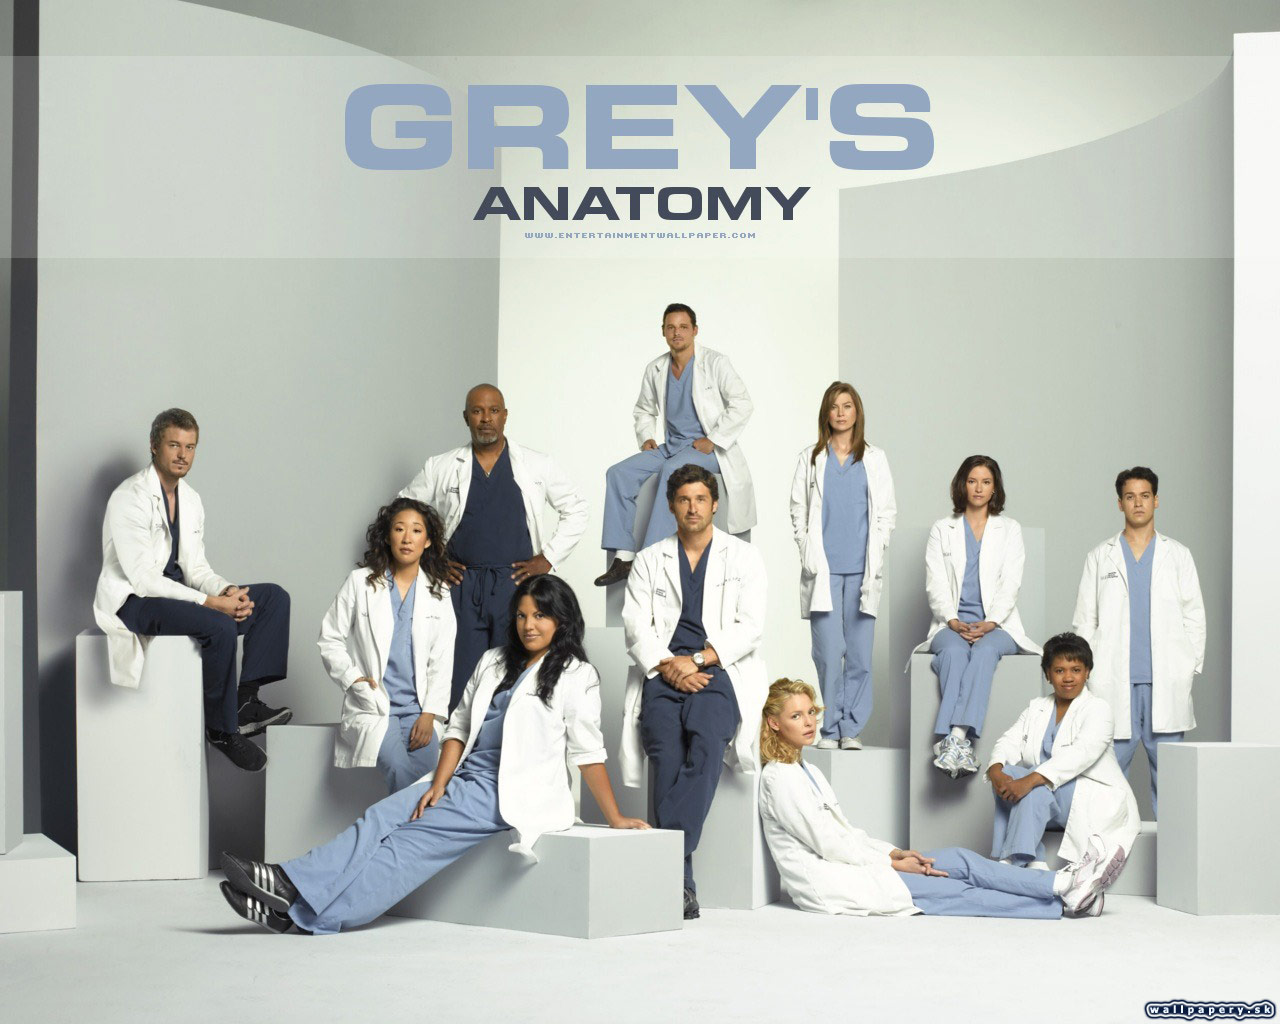 Greys Anatomy: The Video Game - wallpaper 26